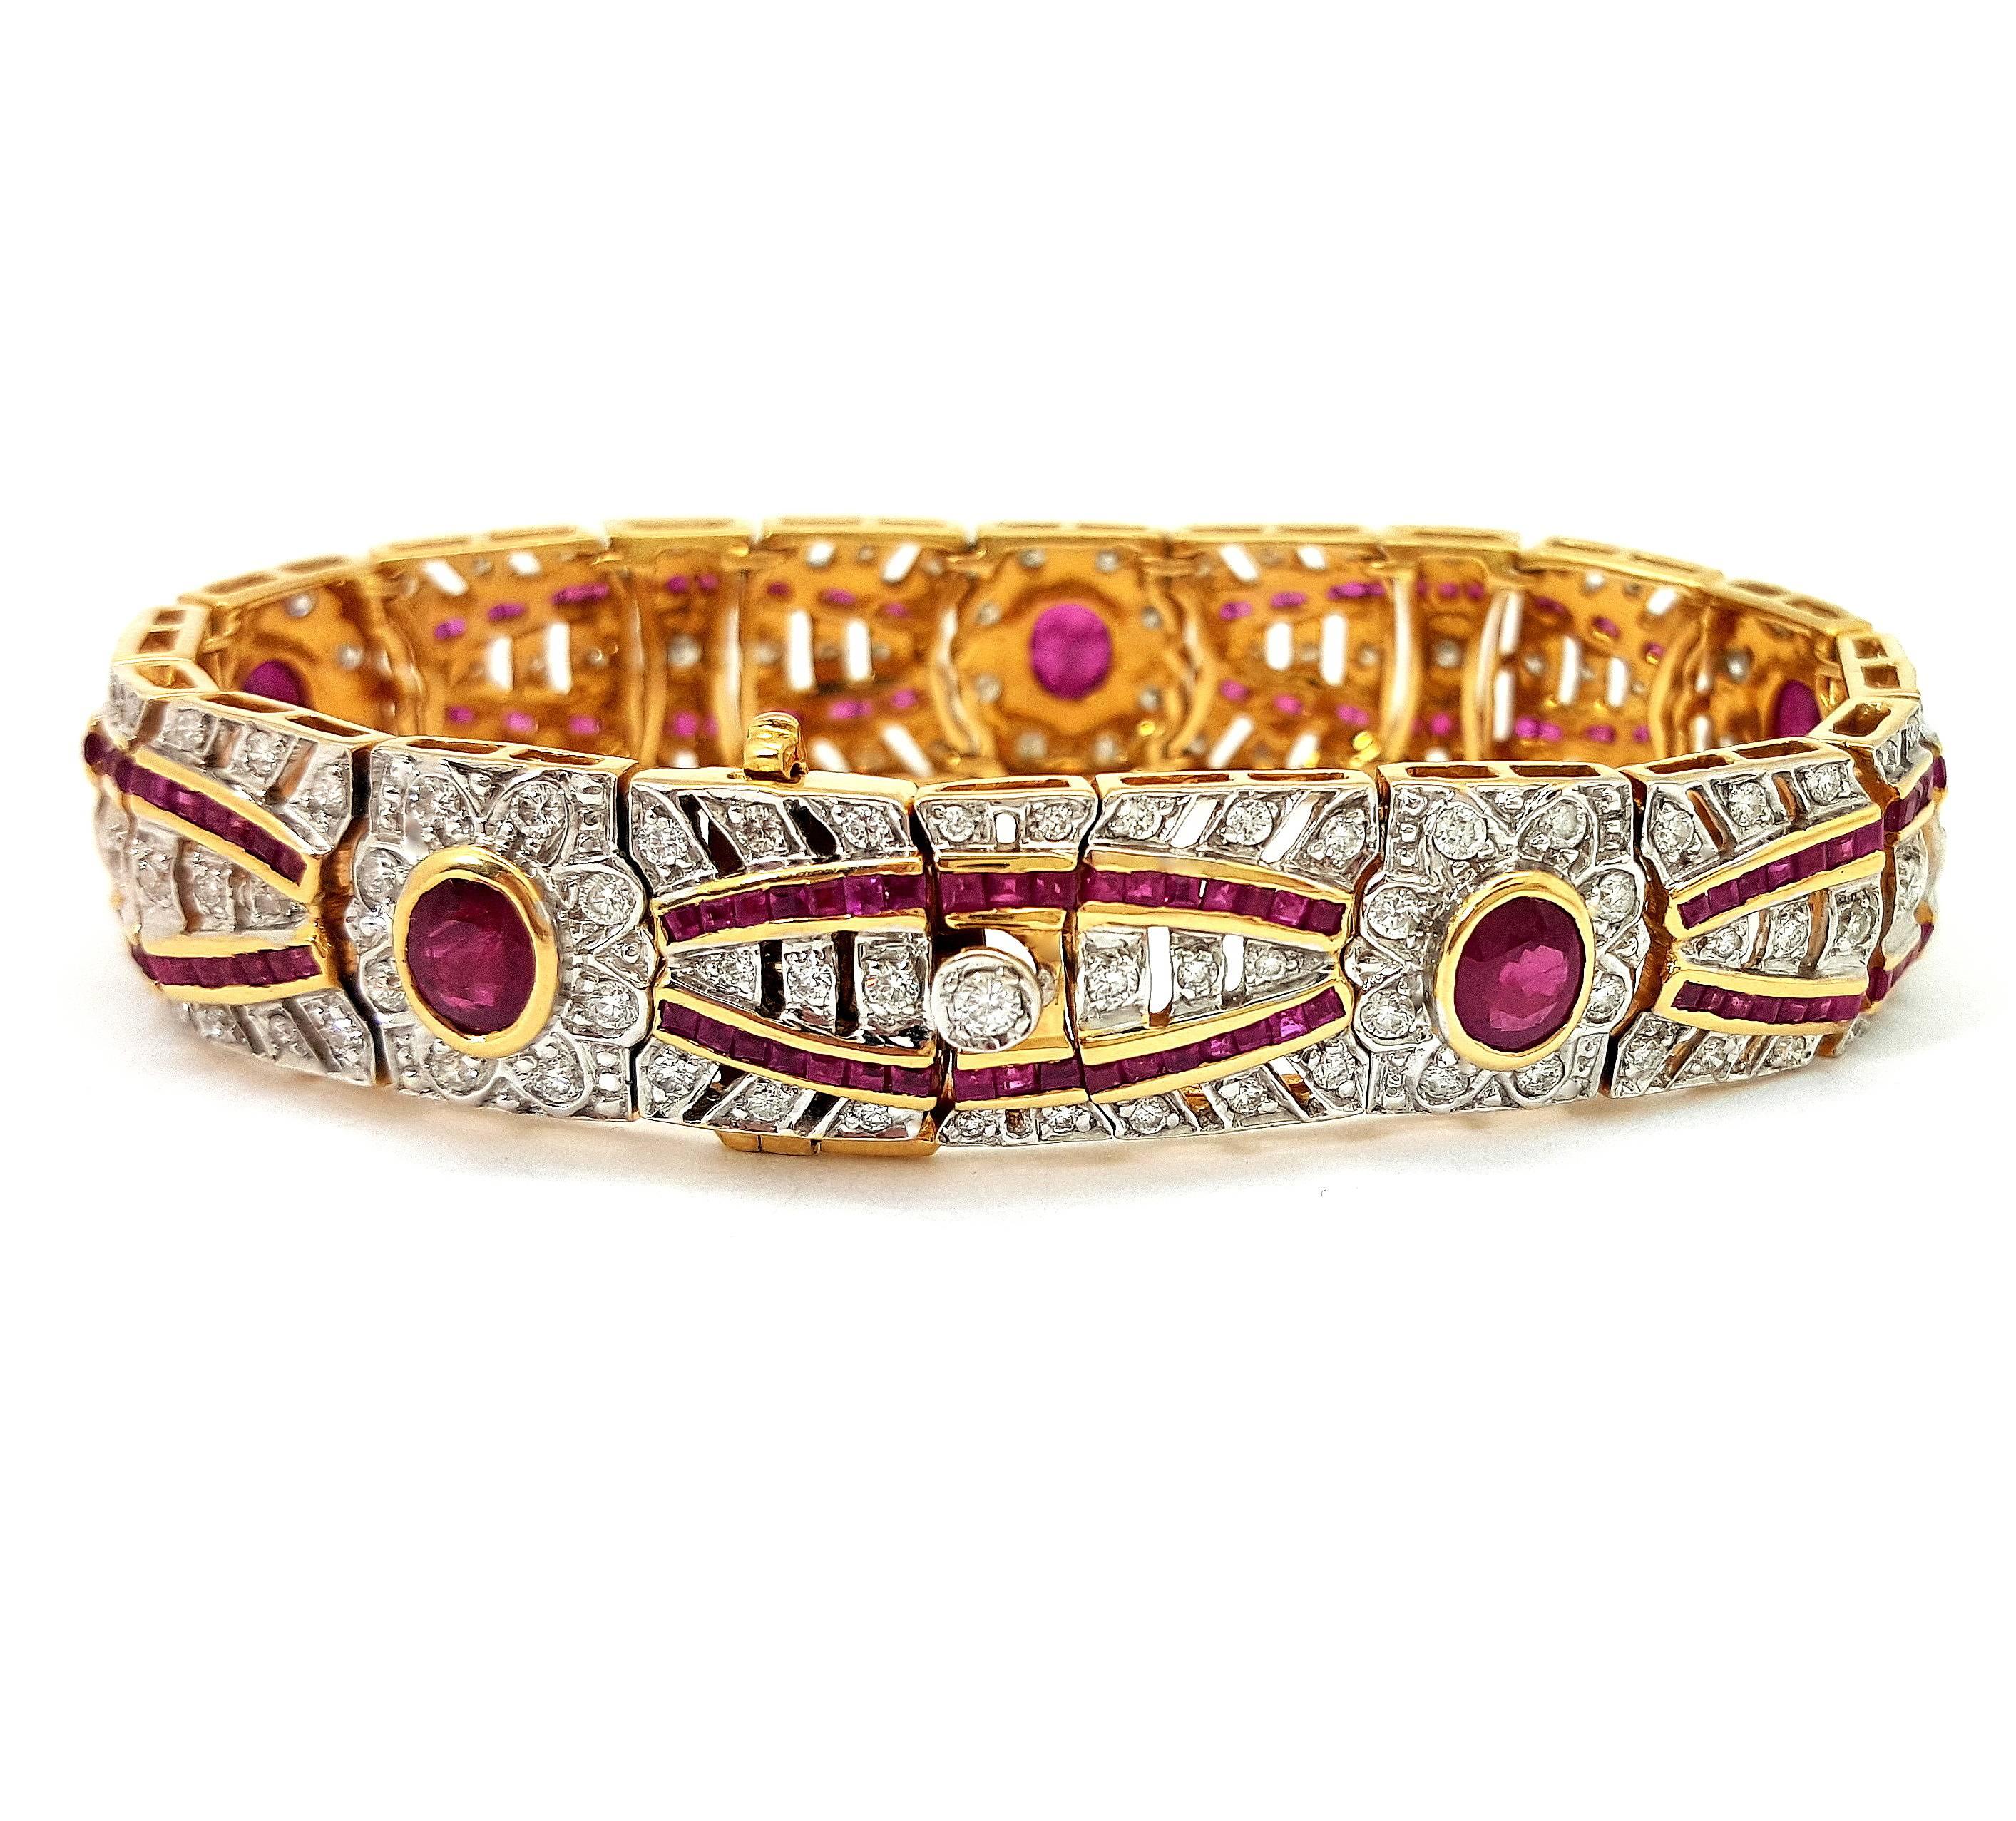 Stunning Ruby Diamond Gold Bracelet In Excellent Condition For Sale In Scottsdale, AZ